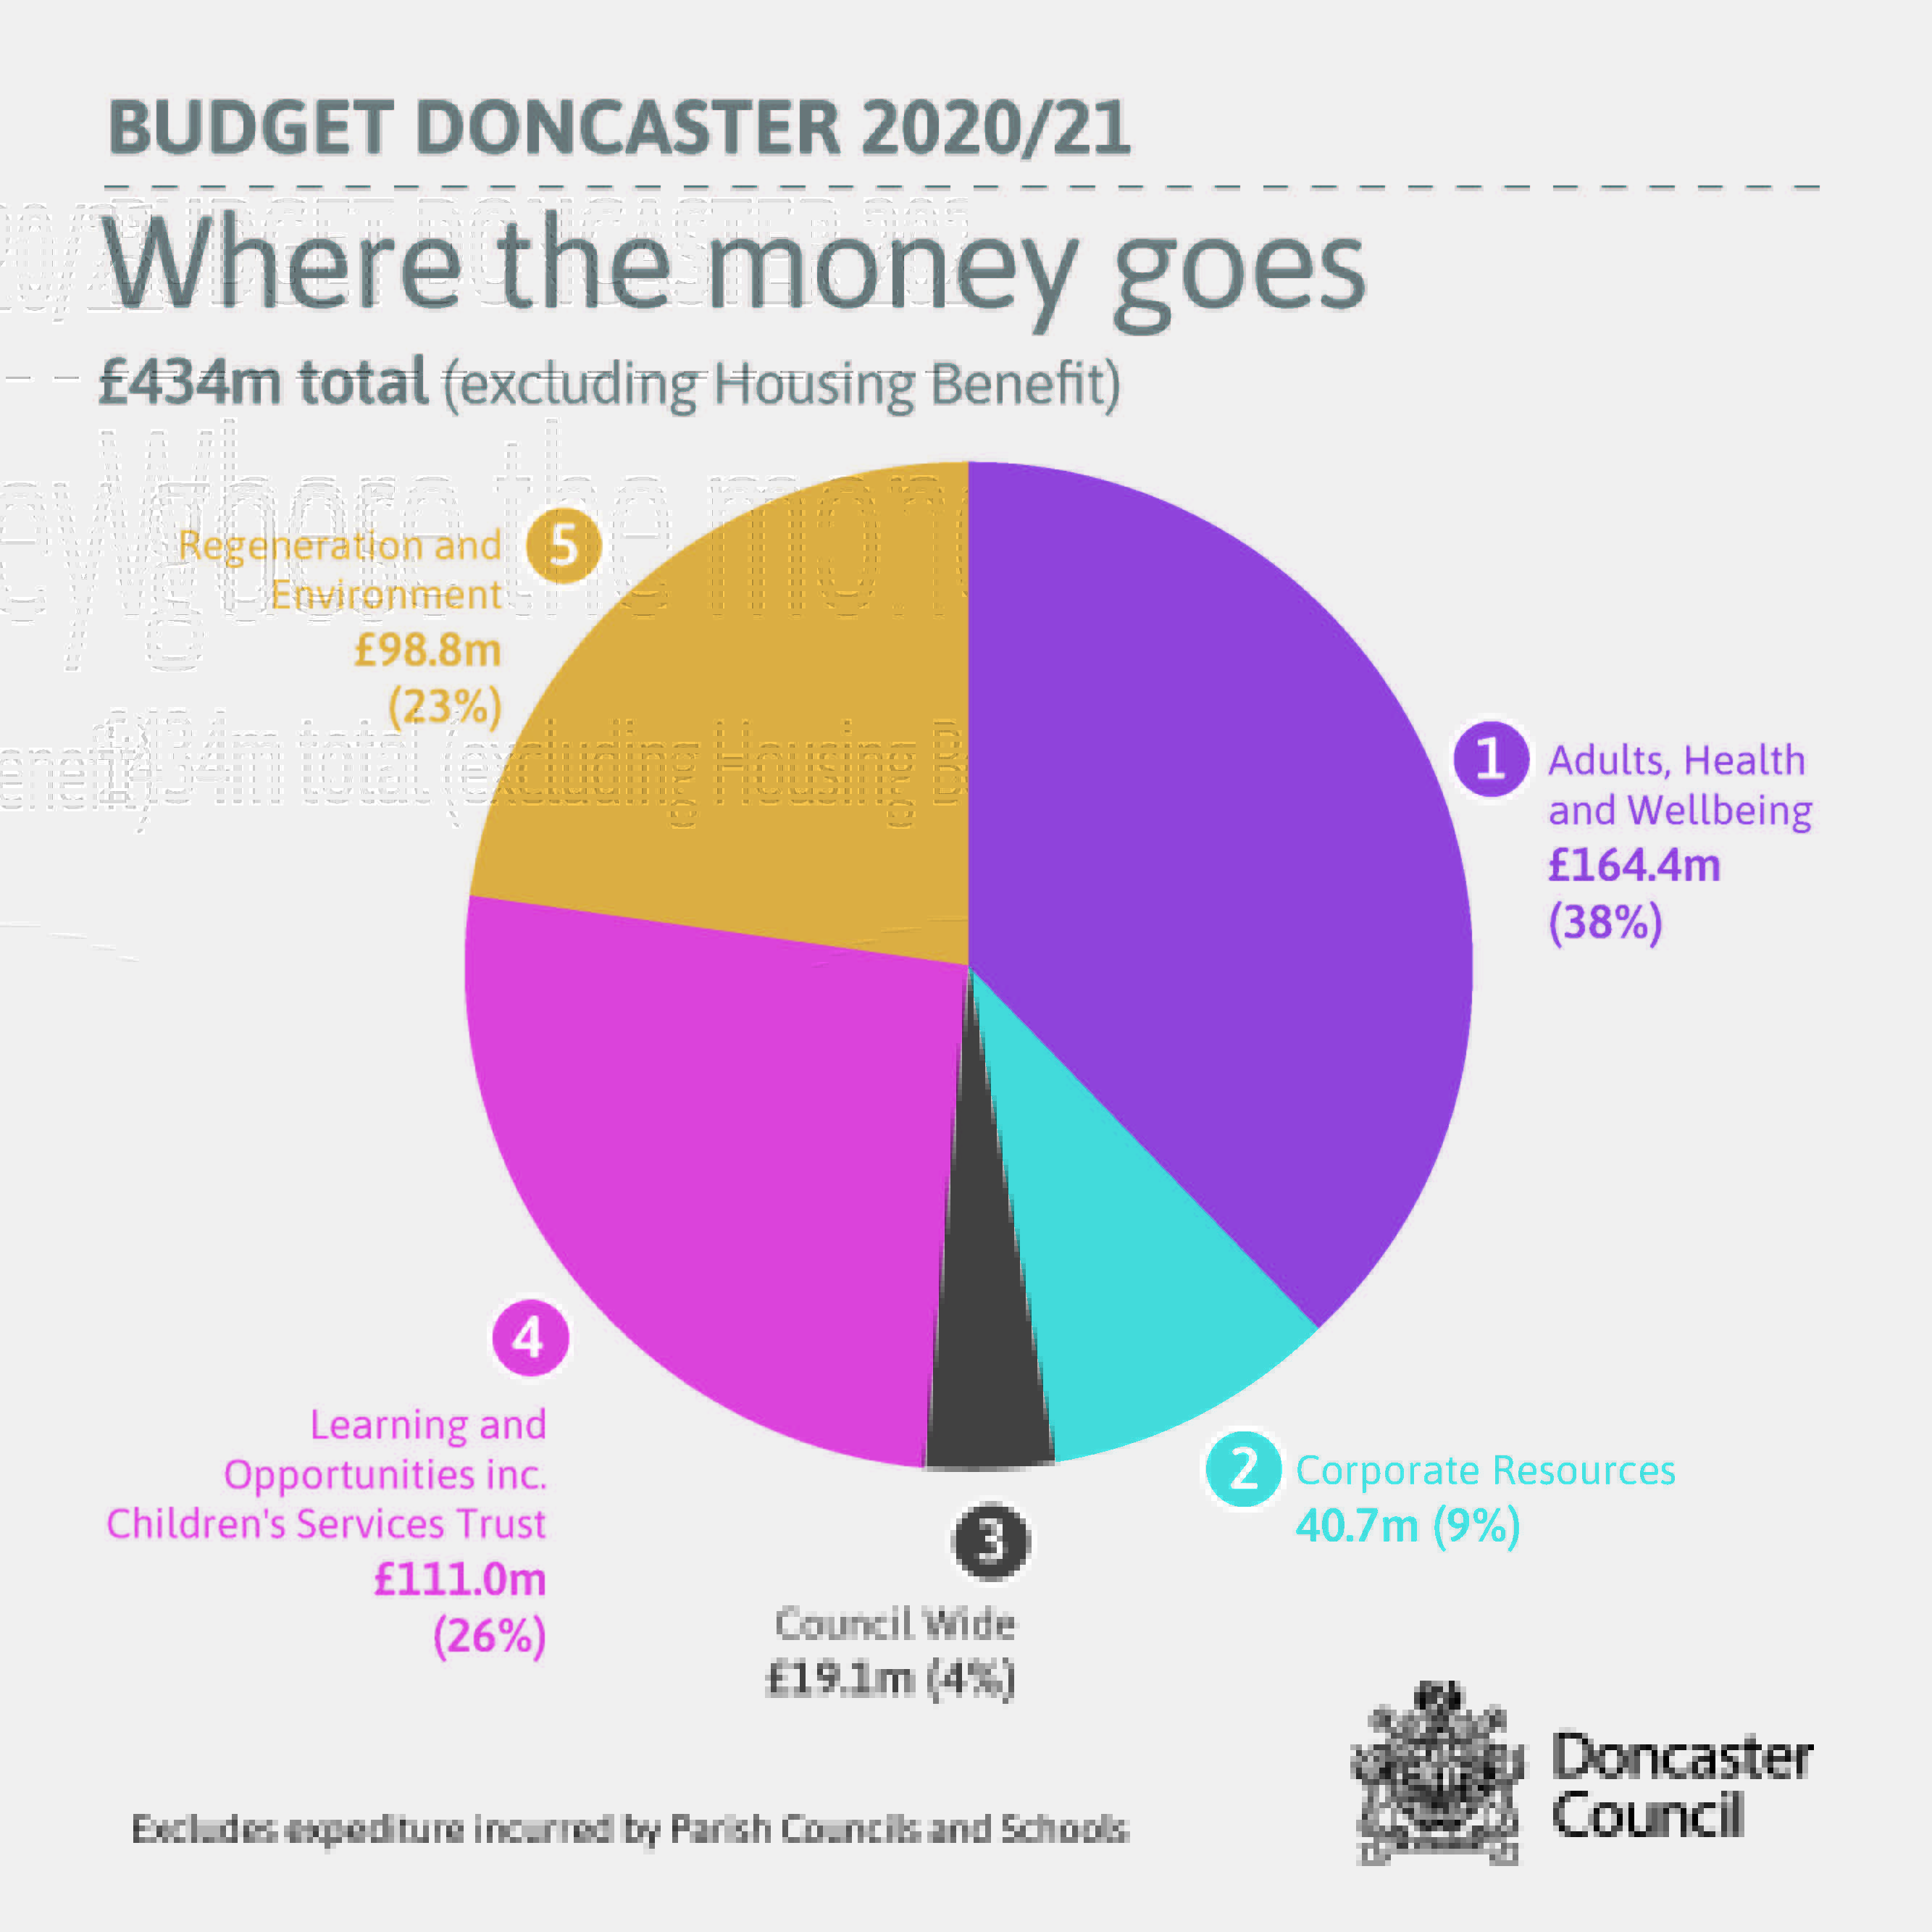 Doncaster Council Tax Contact Number